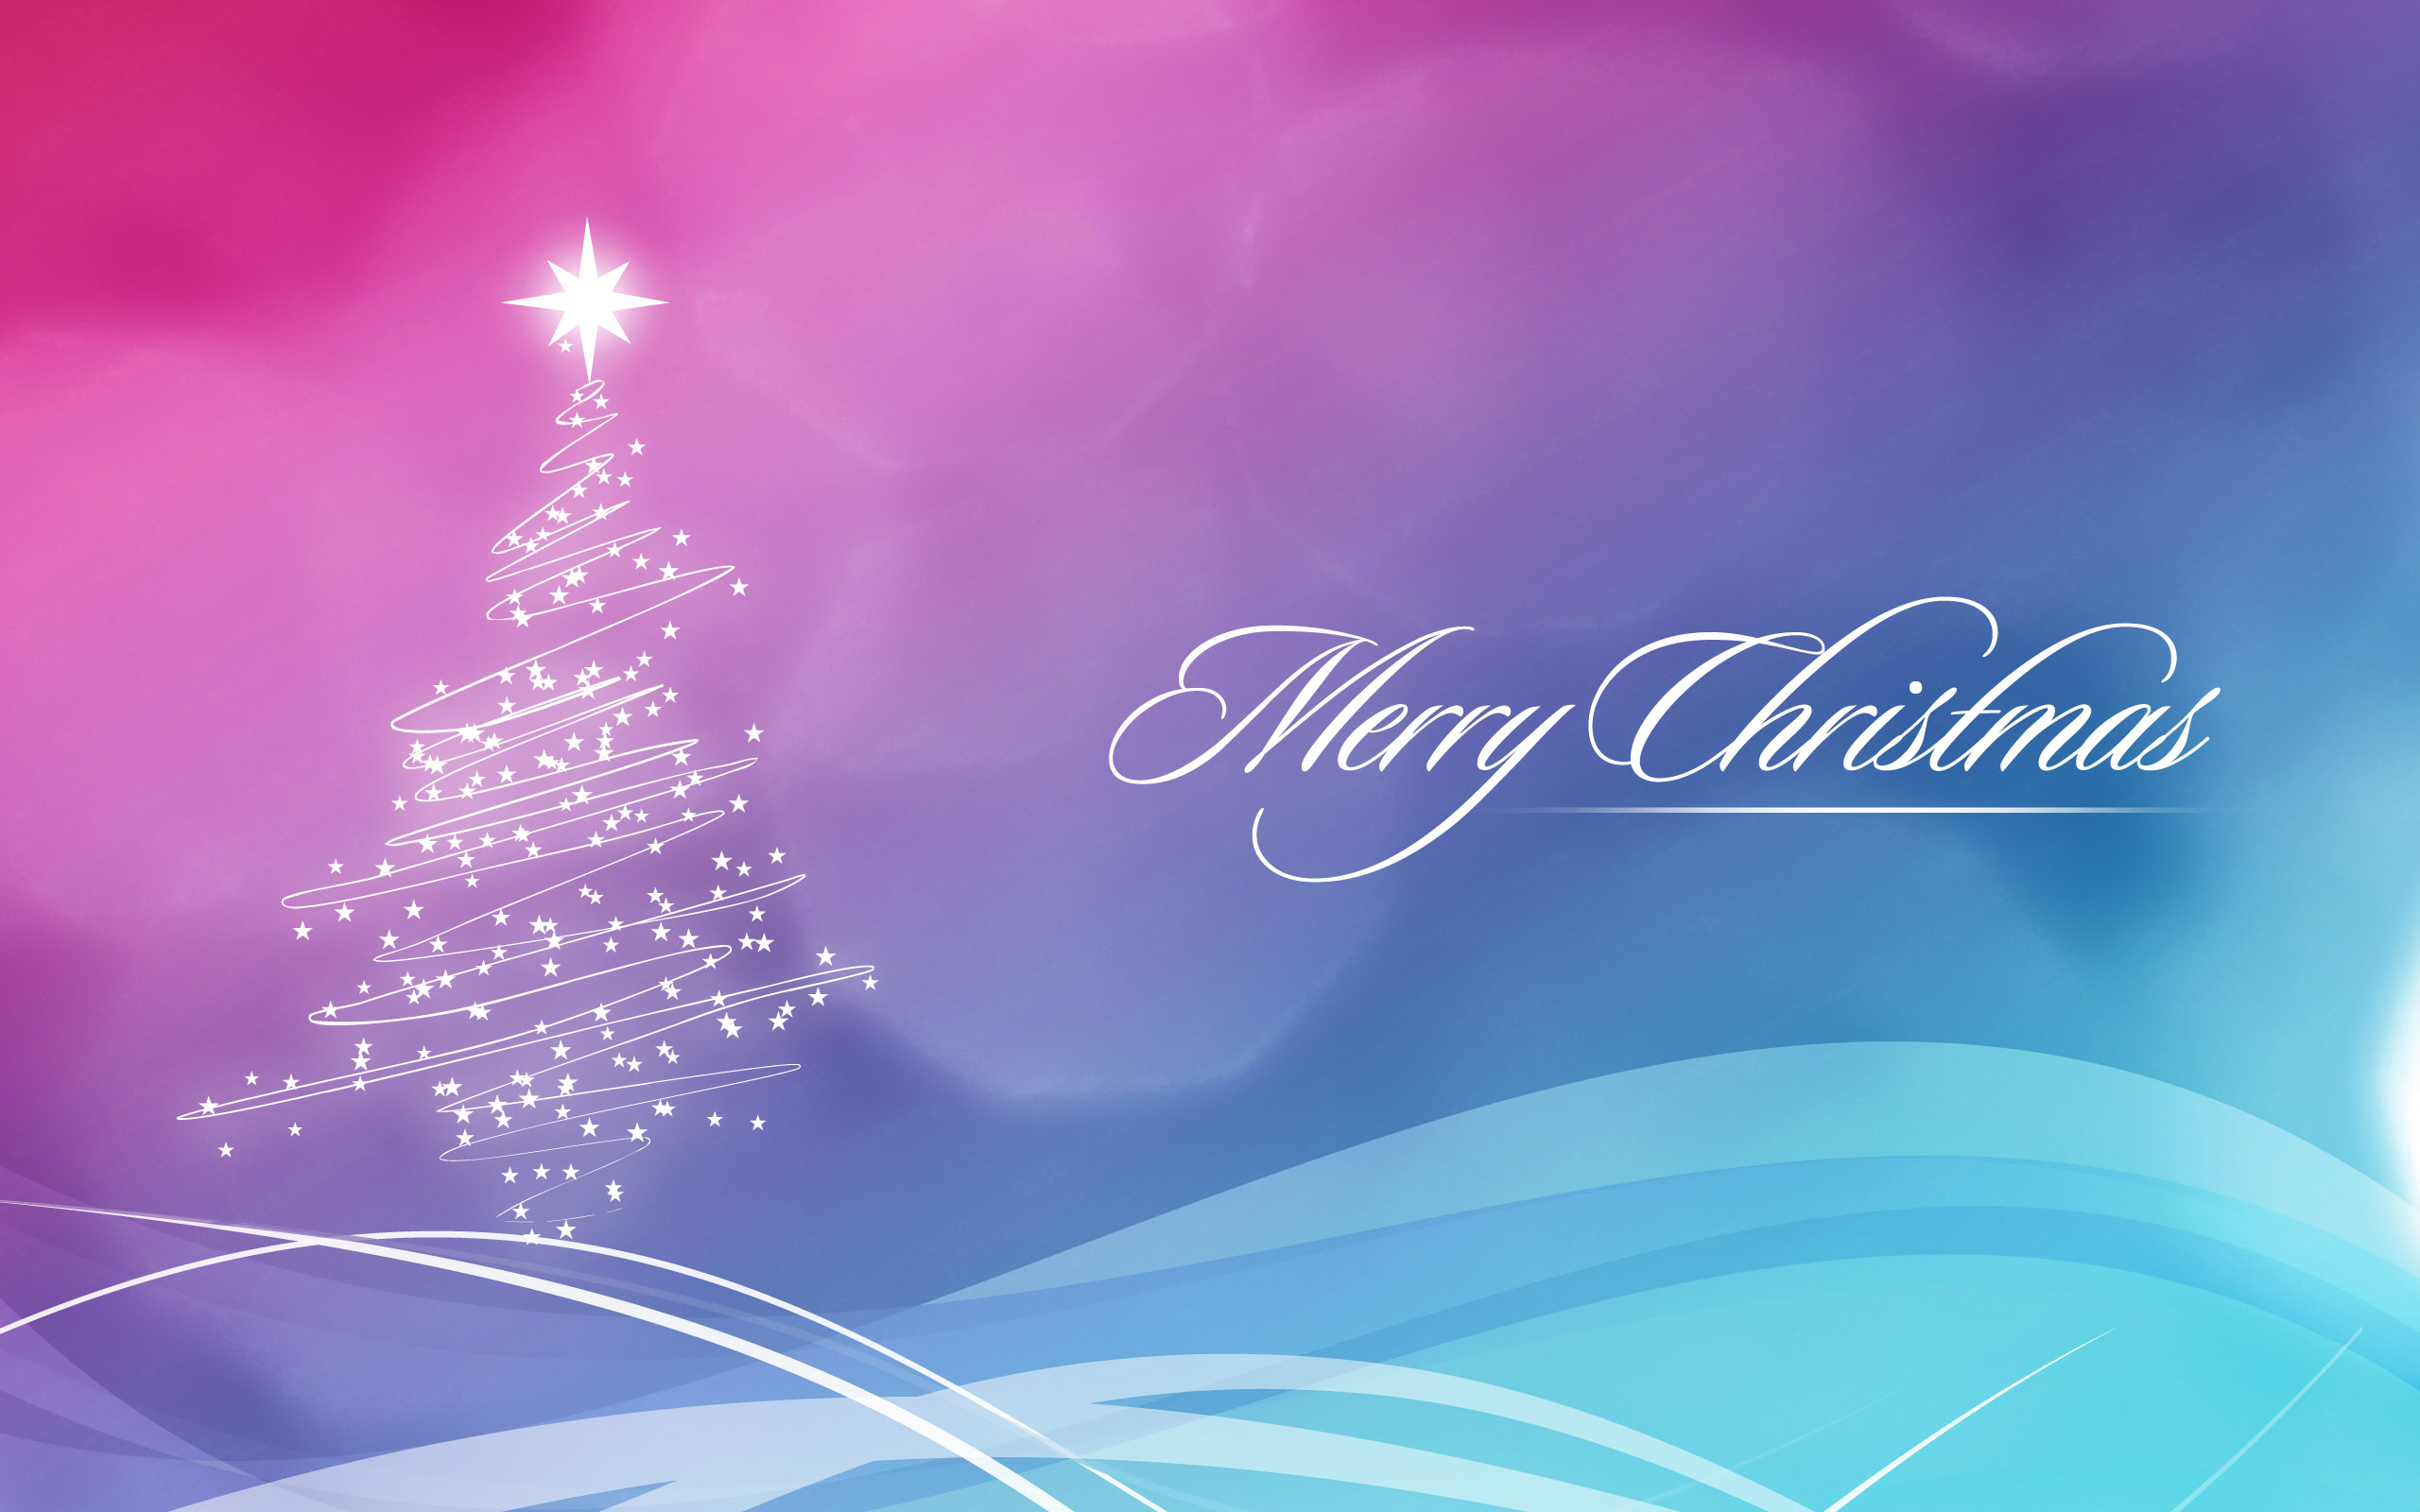 Merry Christmas Cover Photos For Timeline